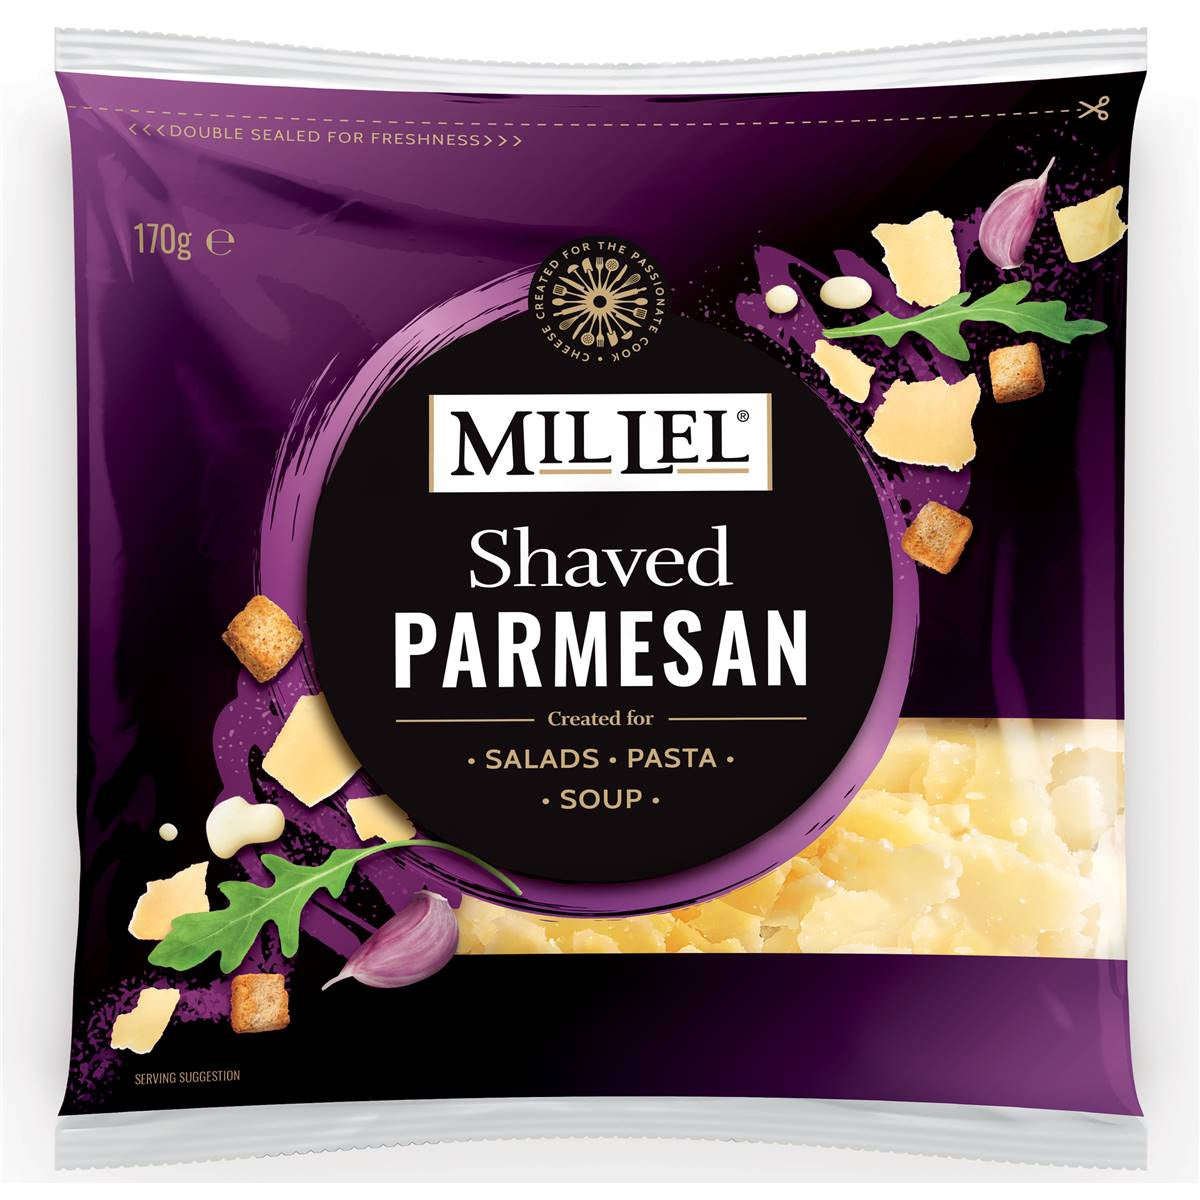 Mil Lel Parmesan Cheese Shaved 170g